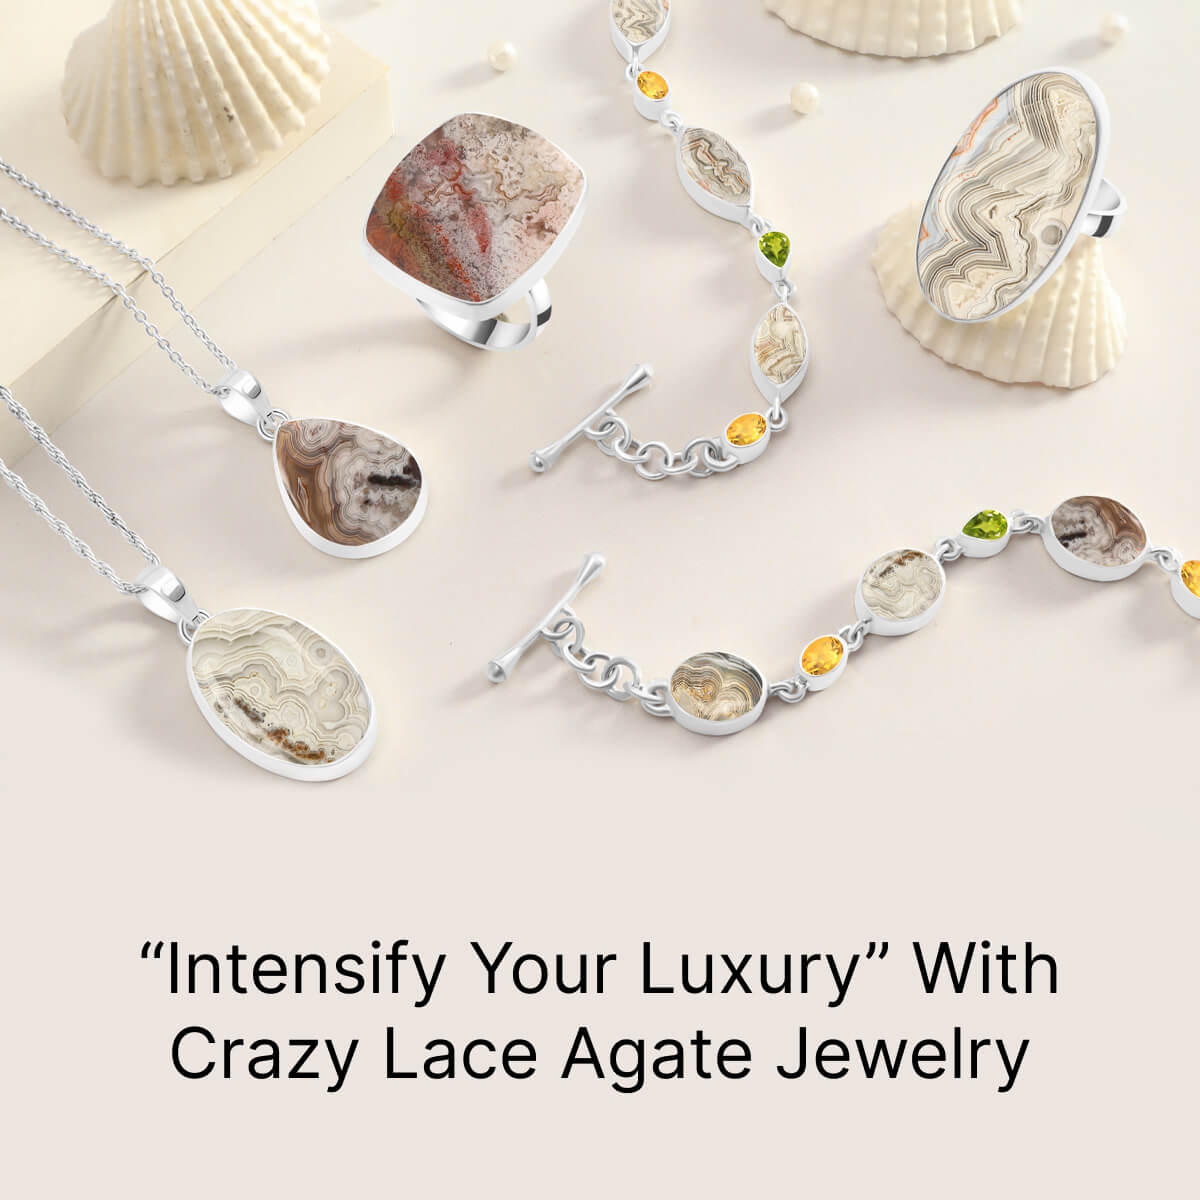 Crazy Lace Agate Jewelry